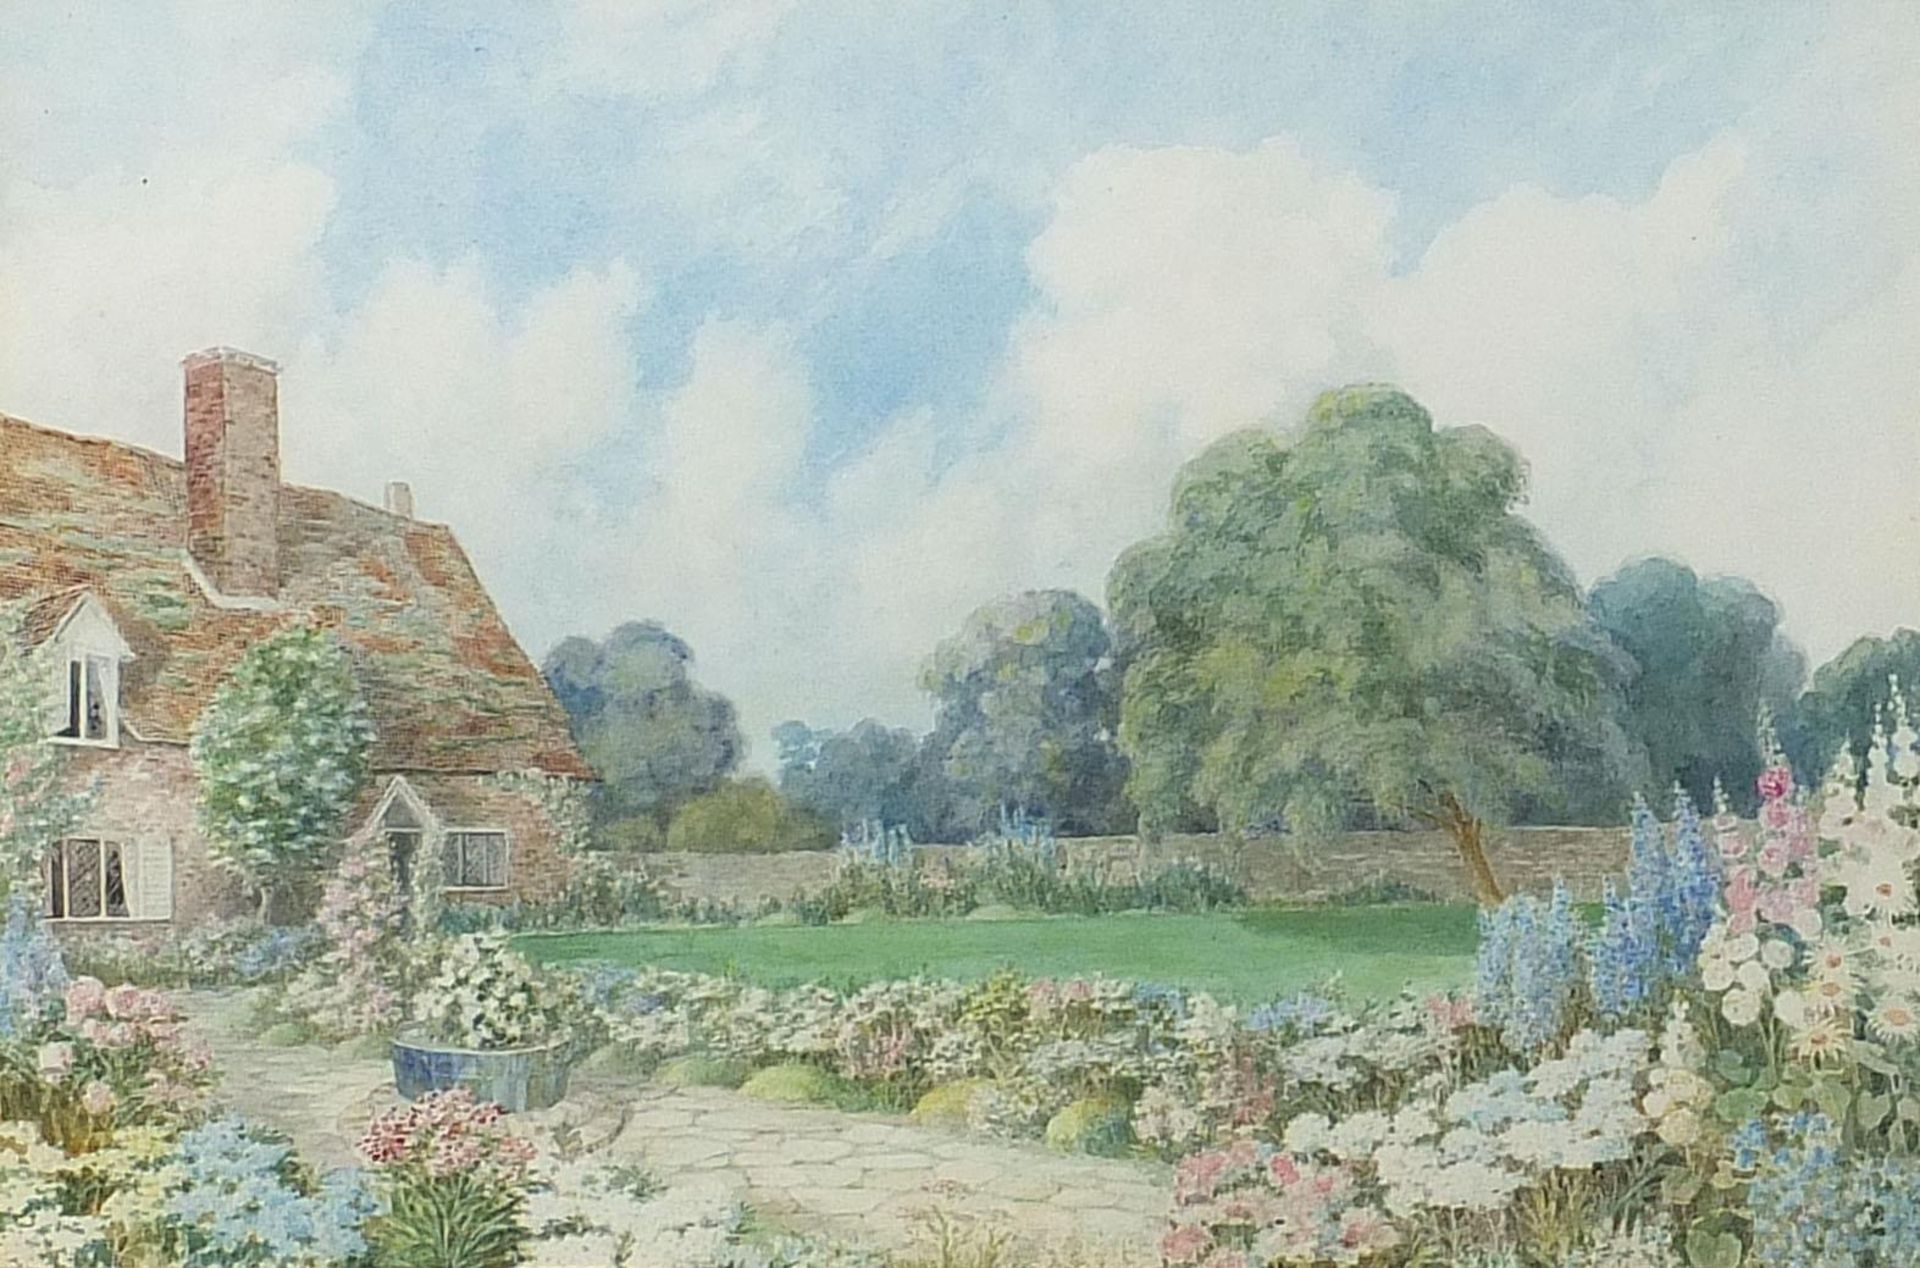 Cottage garden with flowers, Surrey, watercolour, indistinct details verso, mounted, framed and